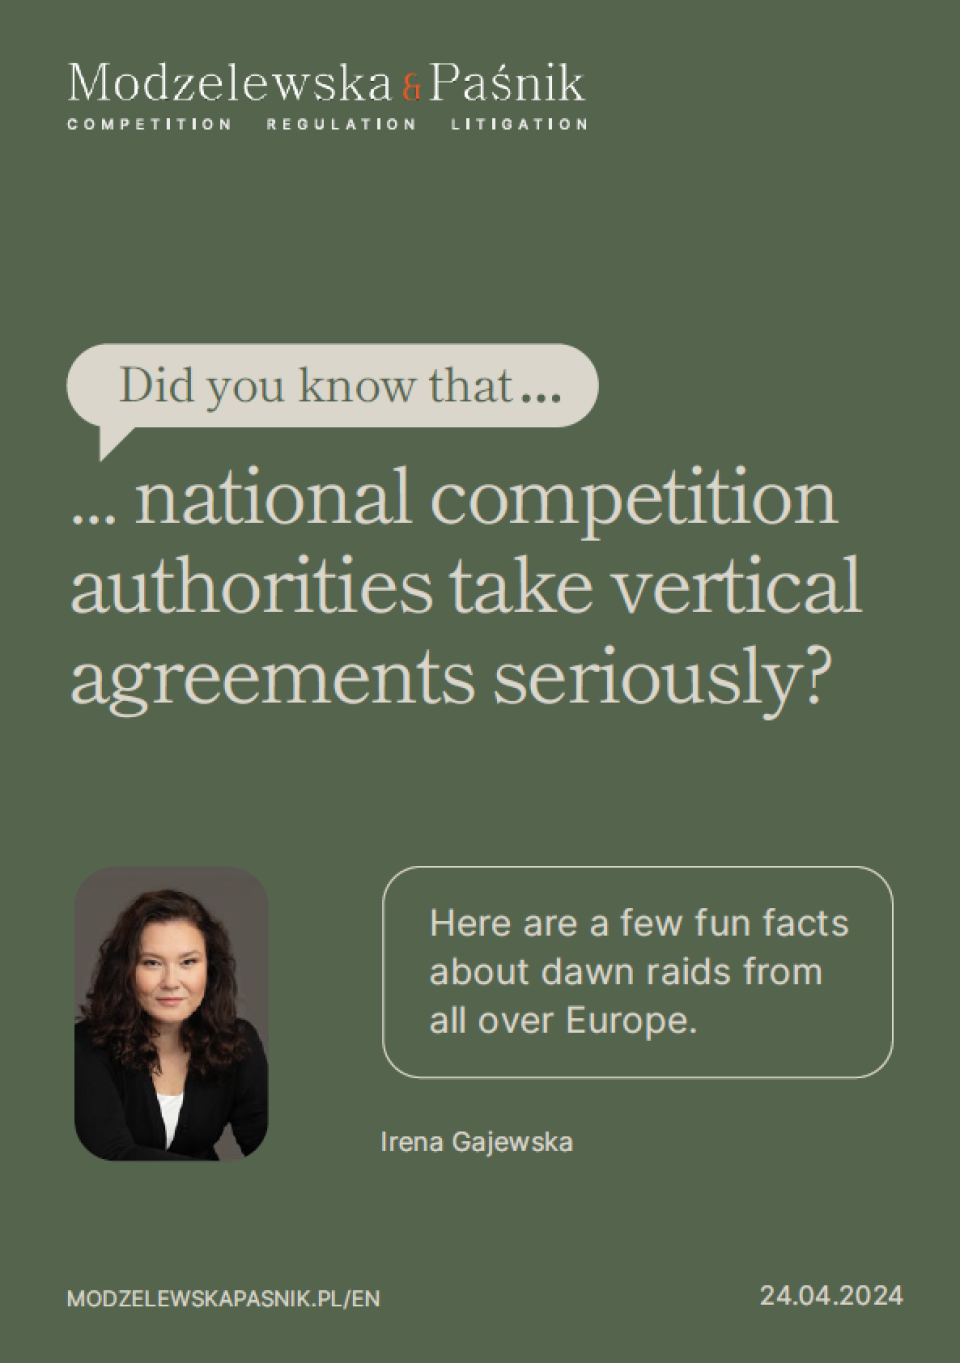 Did you know that national competition authorities take vertical agreements seriously?